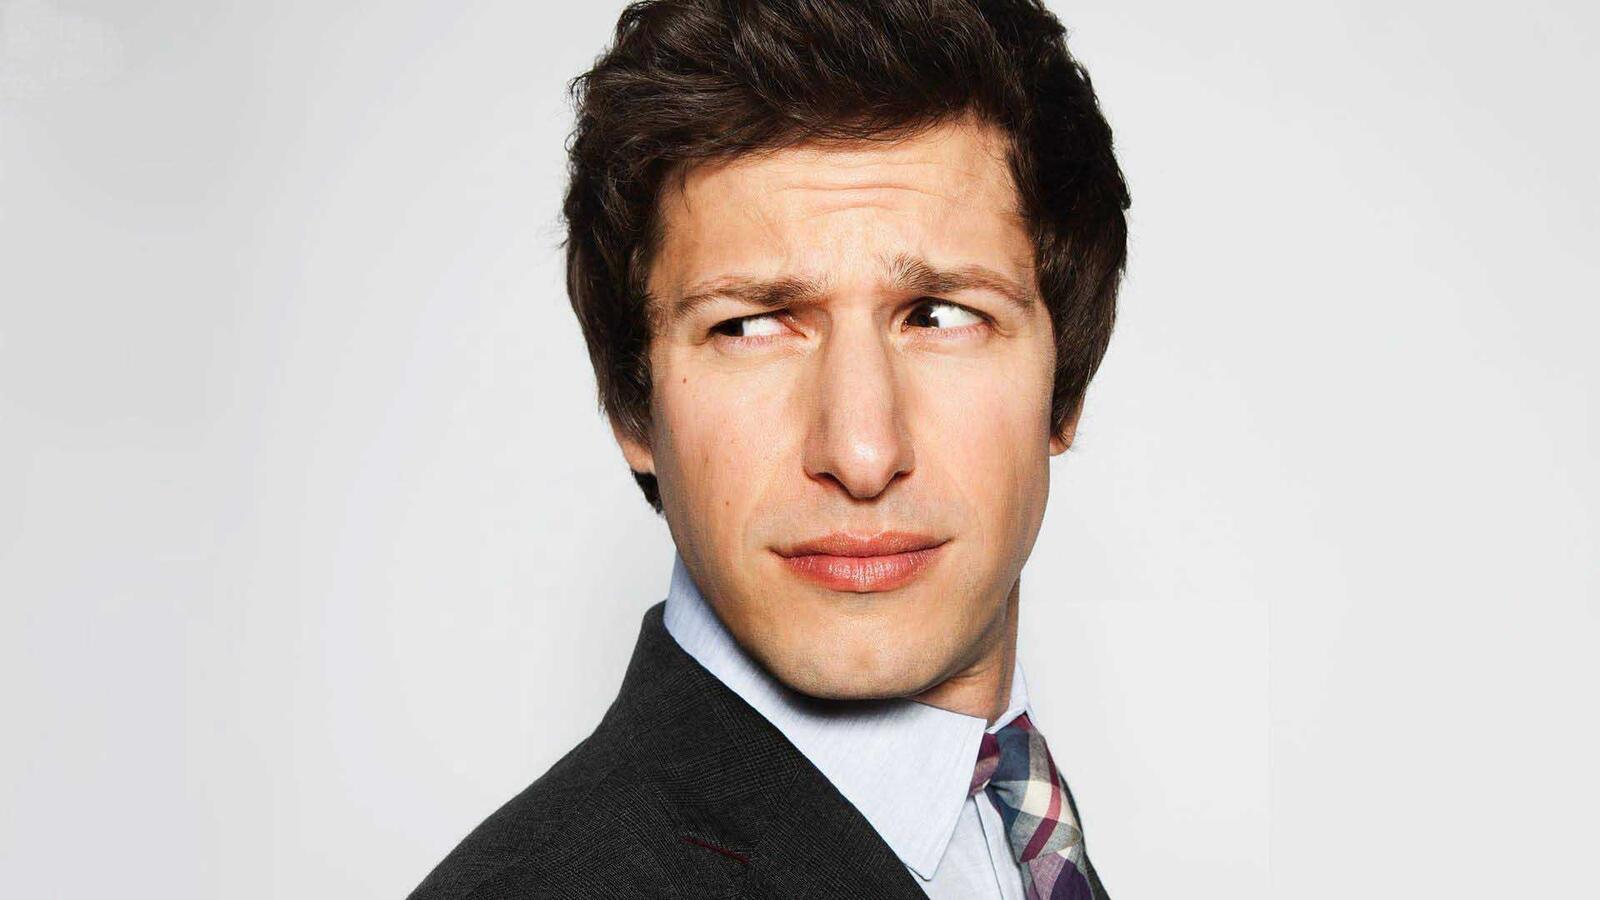 Free photo Andy Samberg in an office suit